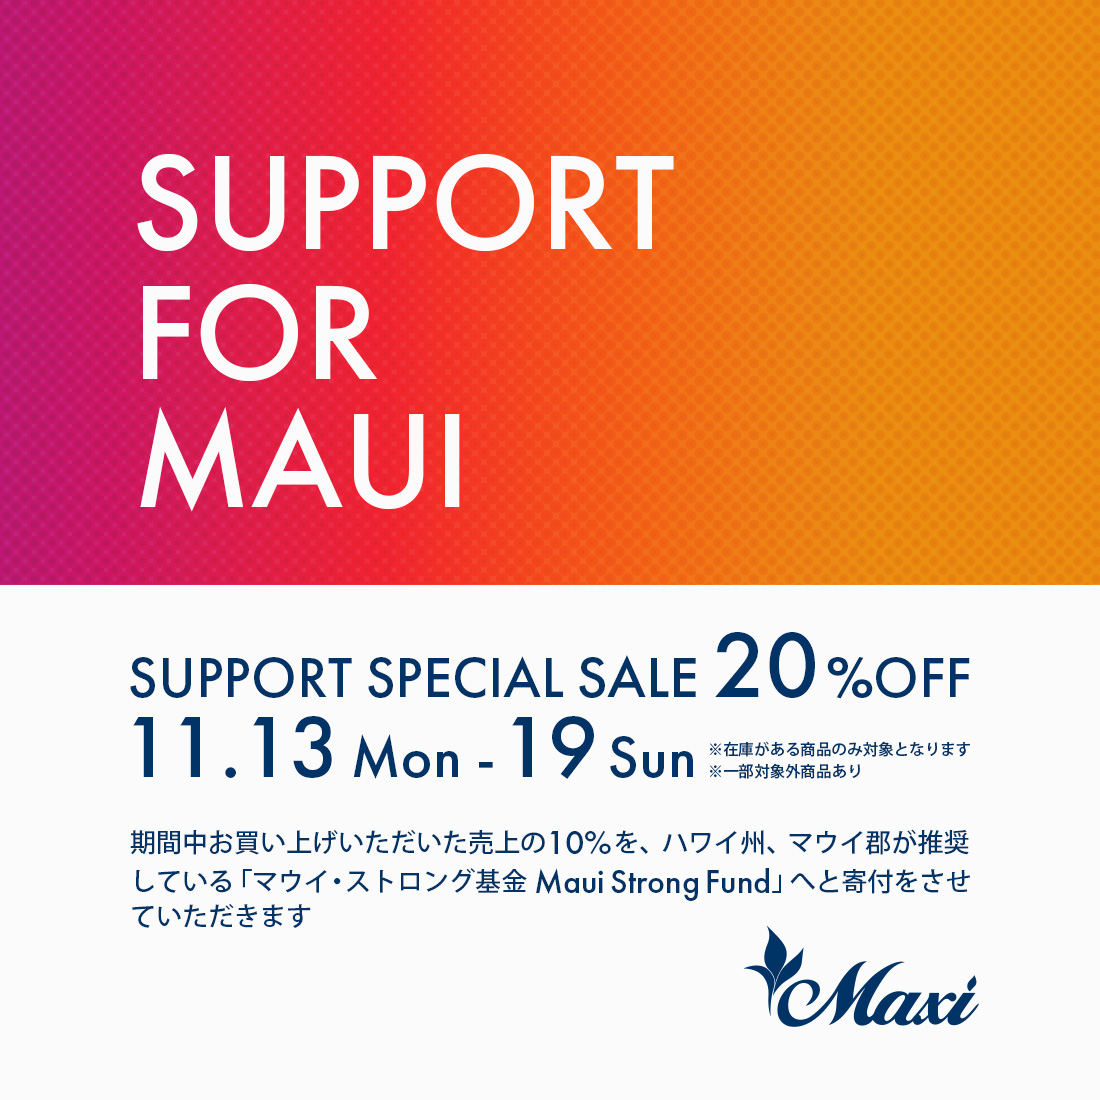 SUPPORT for MAUI